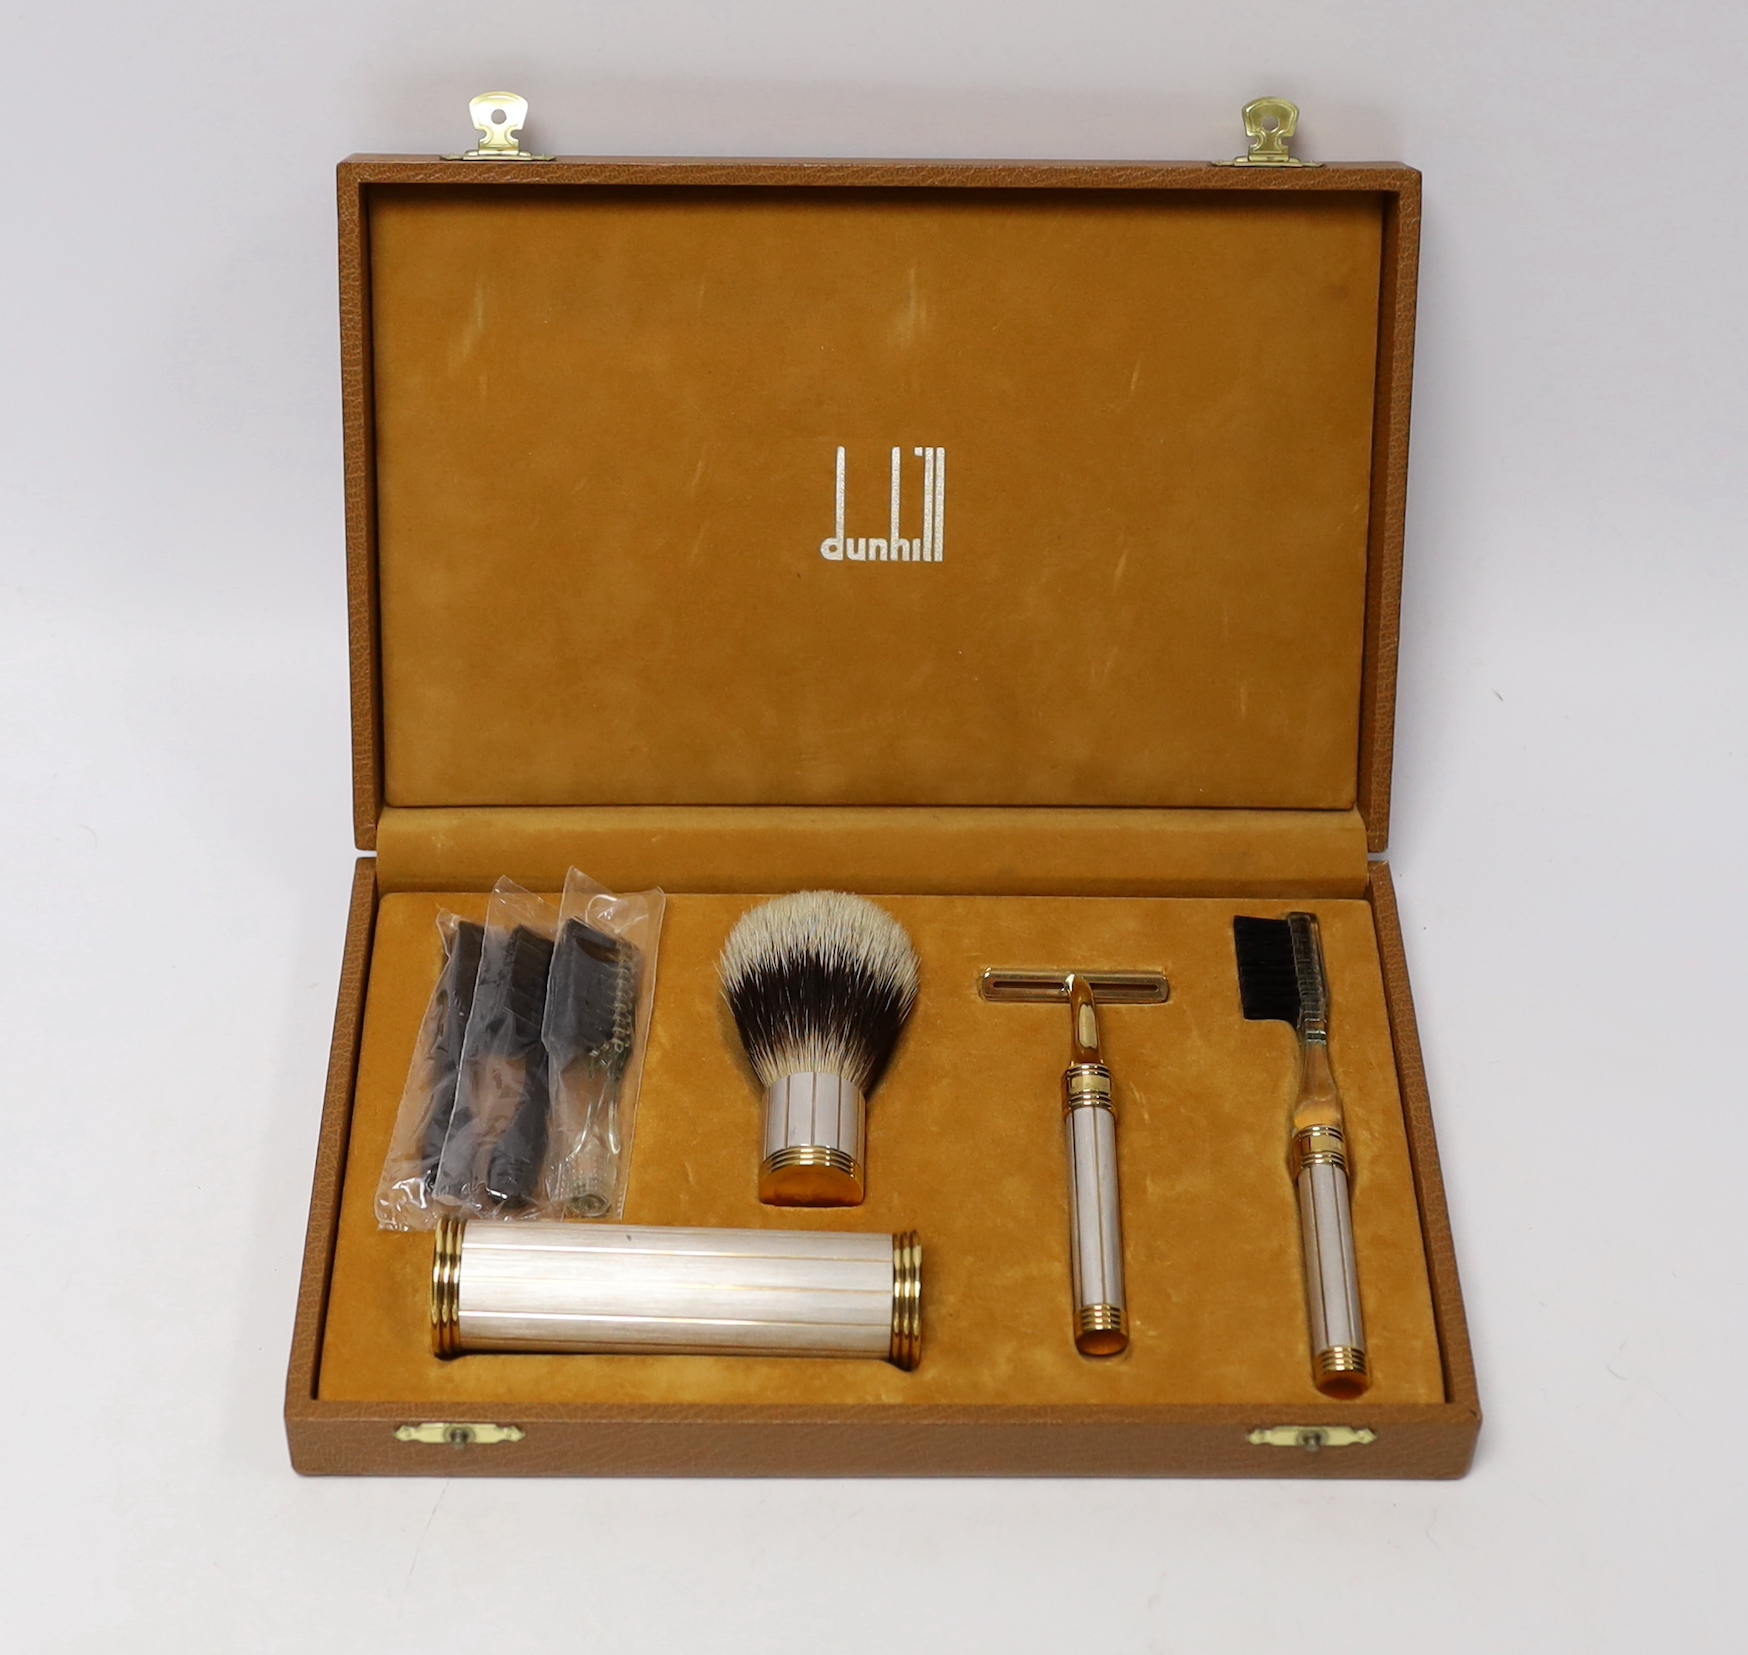 A cased gentleman’s Dunhill vanity set including shaving brush, razor and toothbrush